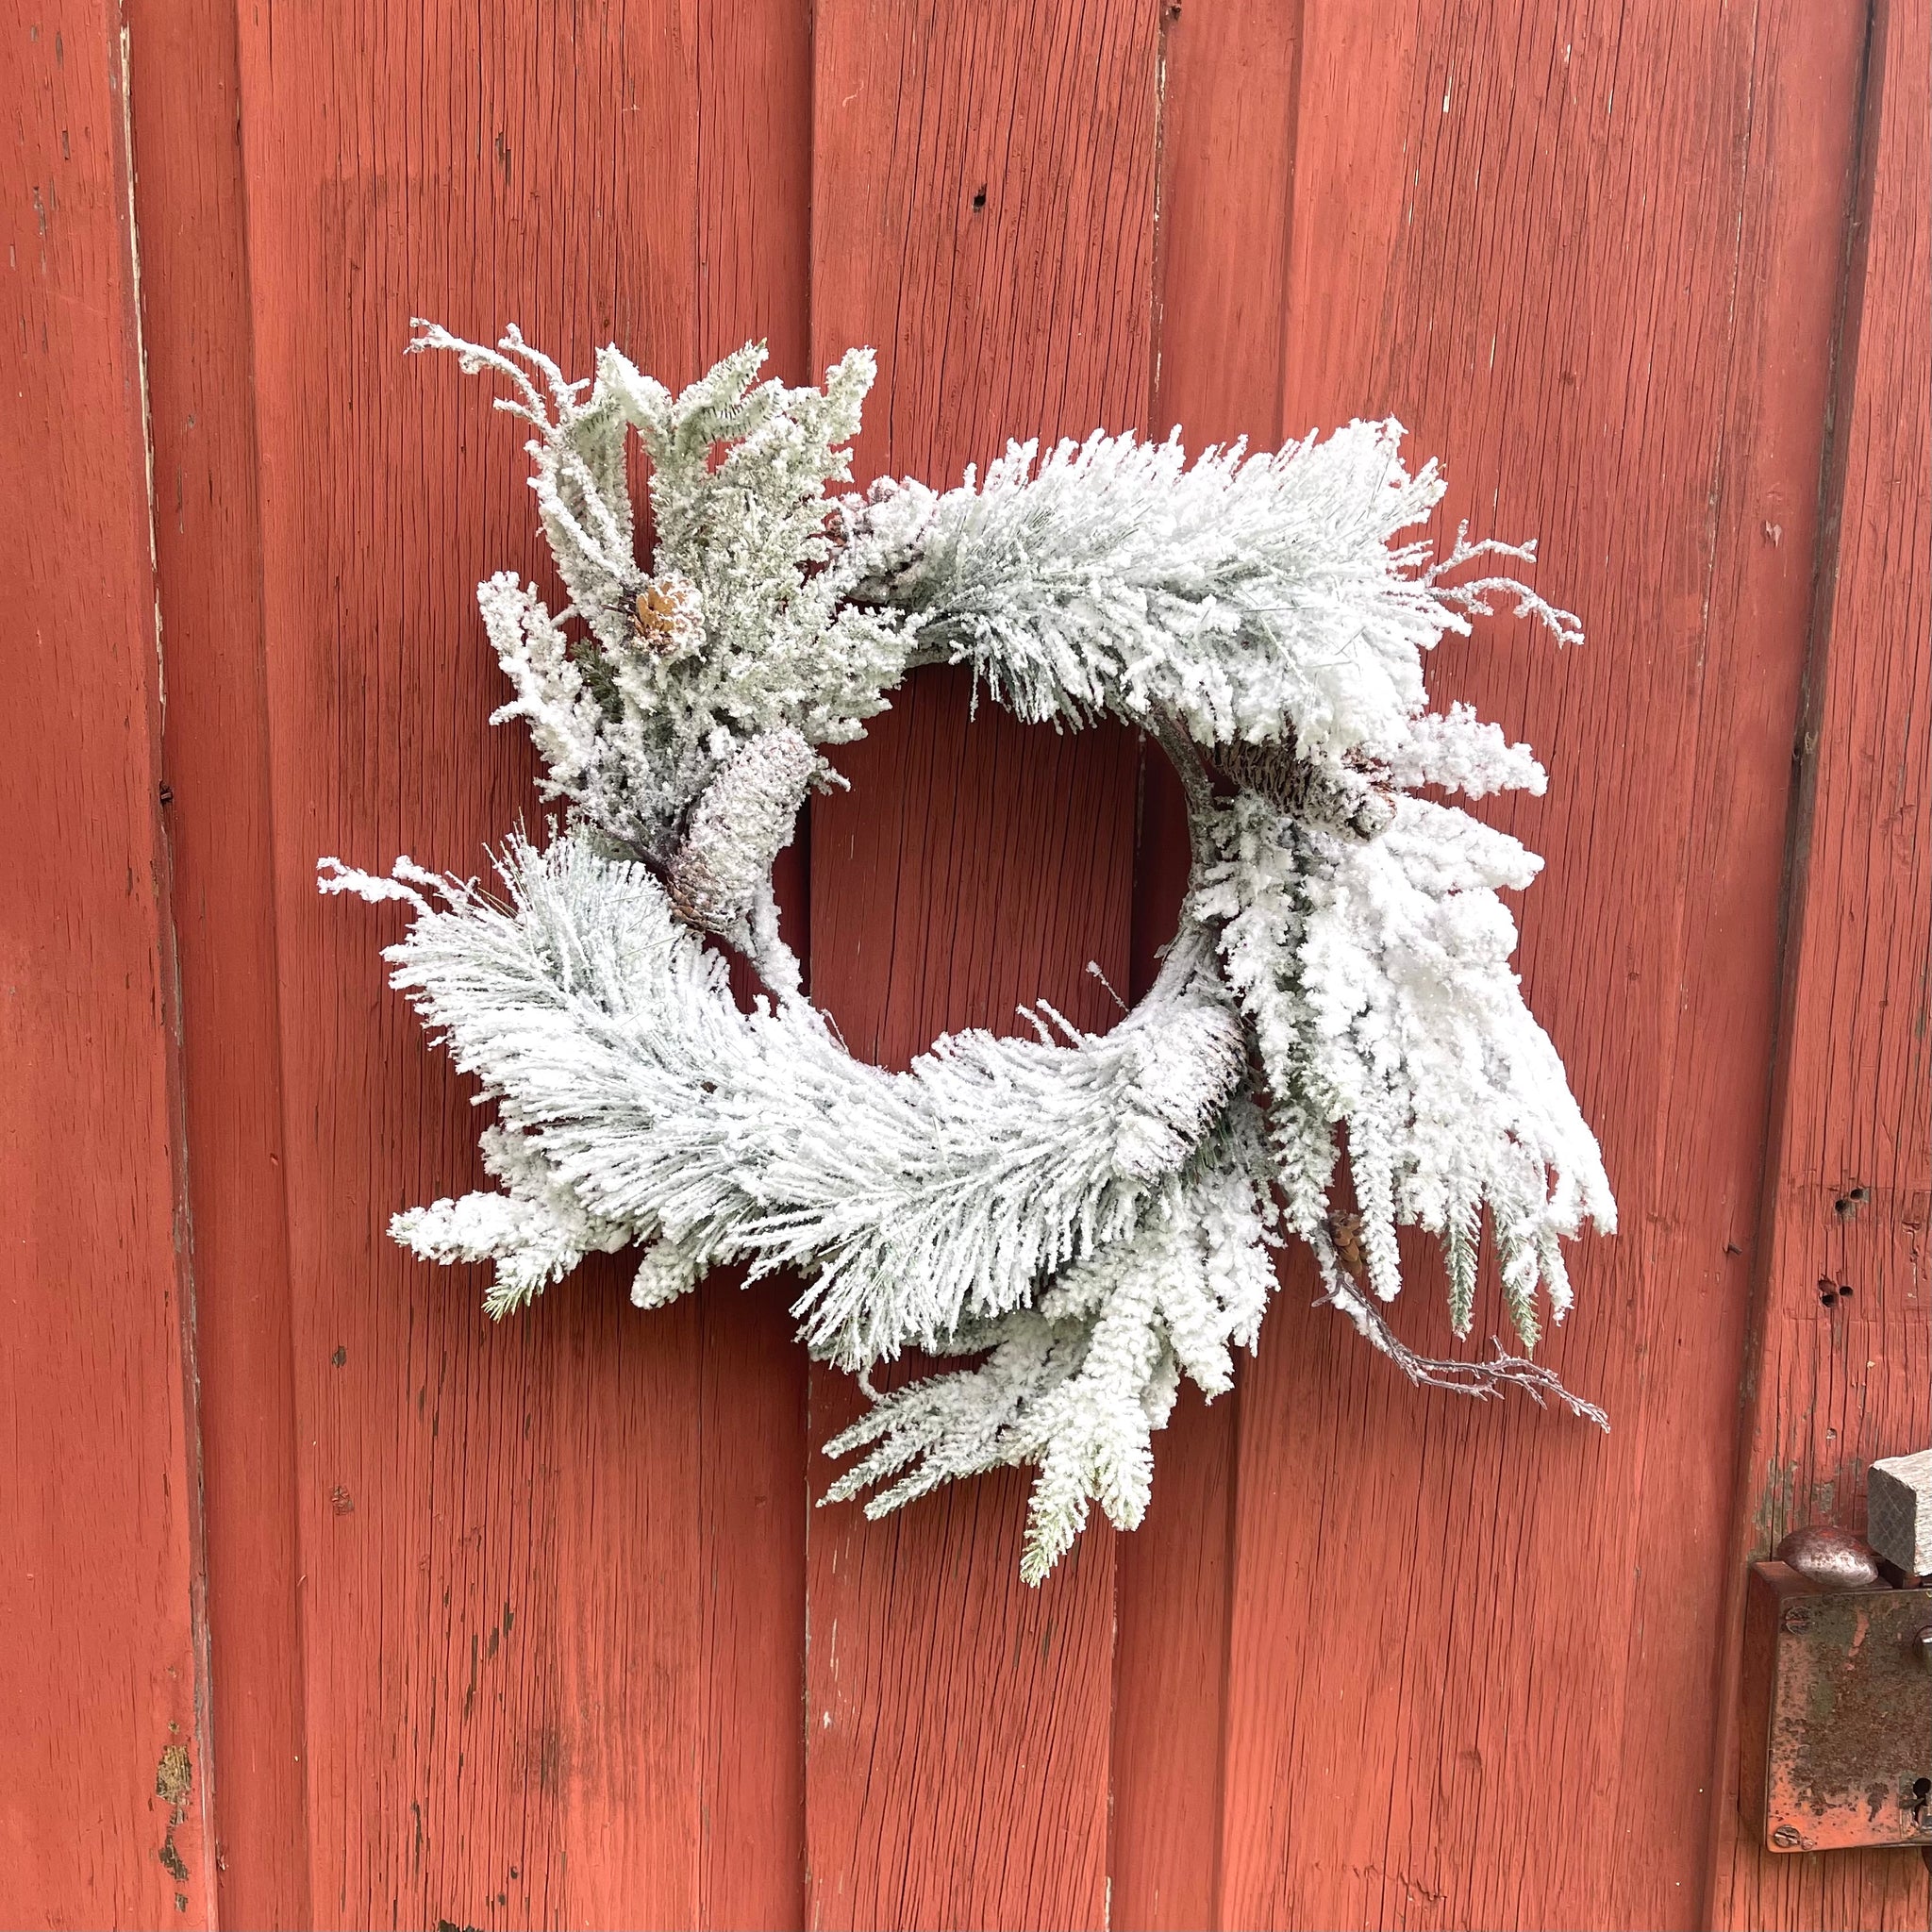 Winter Snow Wreath | Flocked Candle Ring | Winter Decor